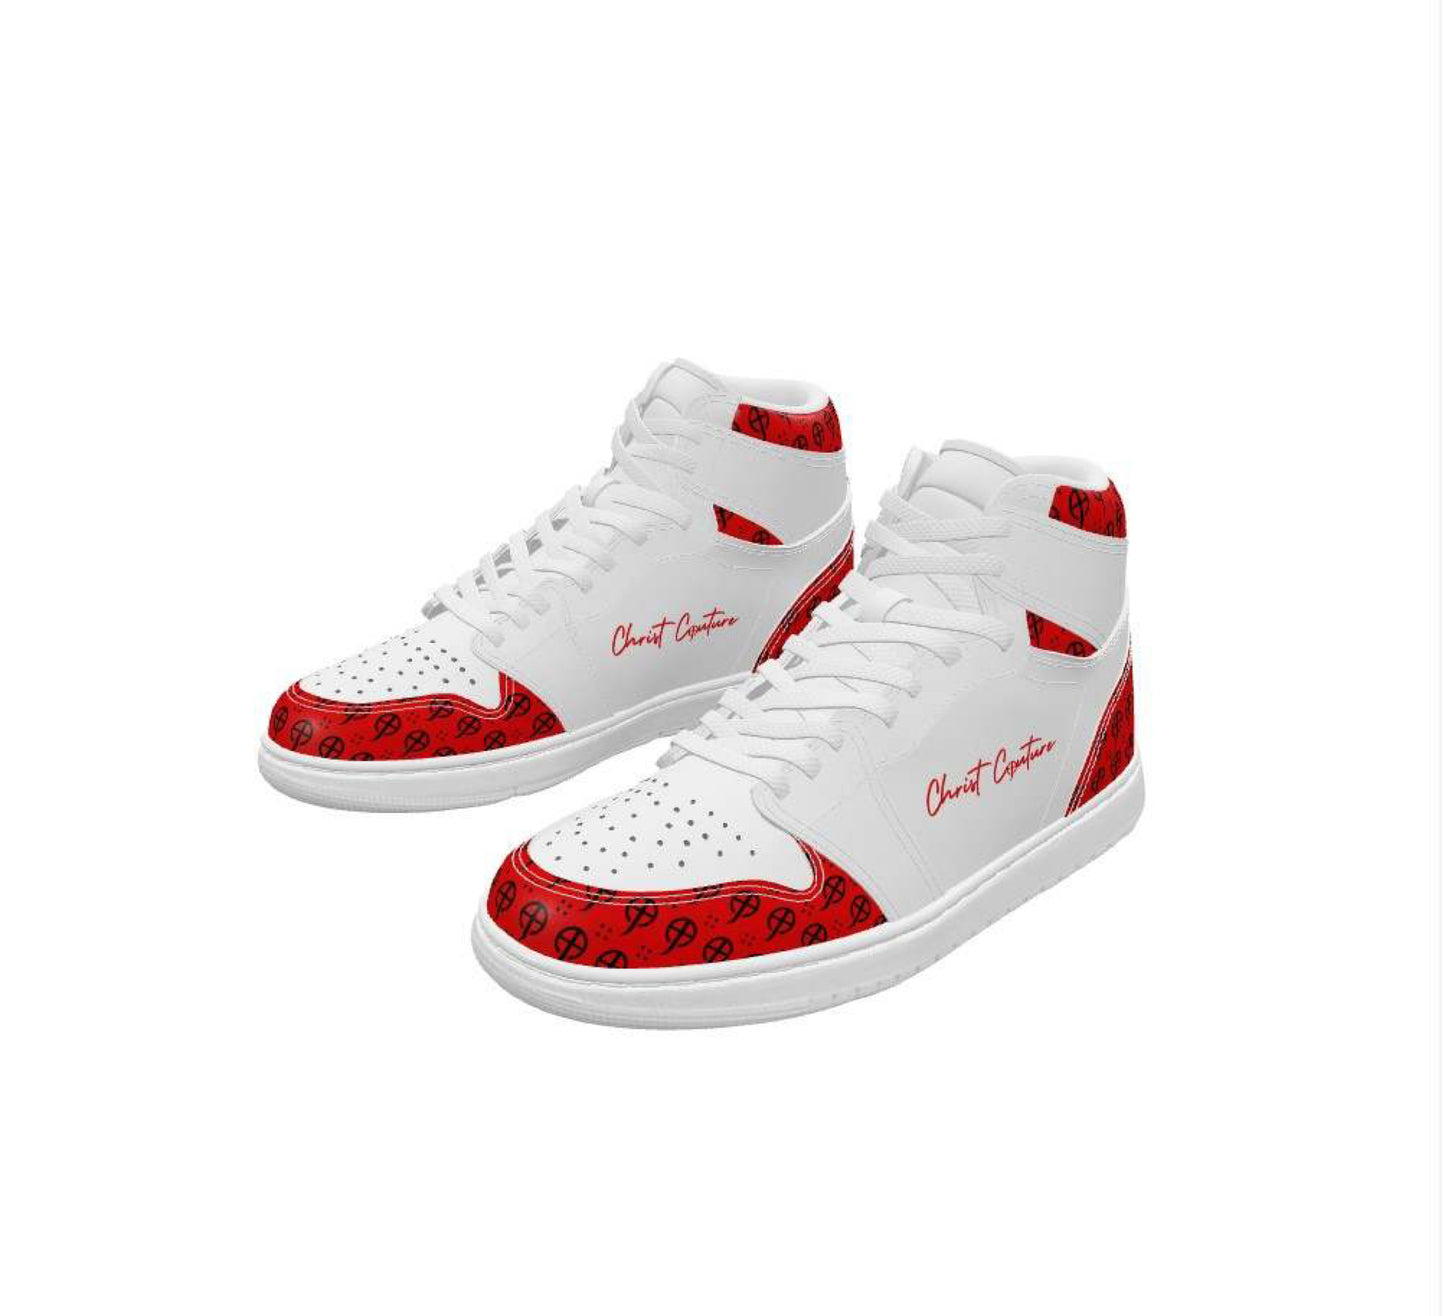 Copy of CC- High-Top Street Style Sneakers  (Unisex)